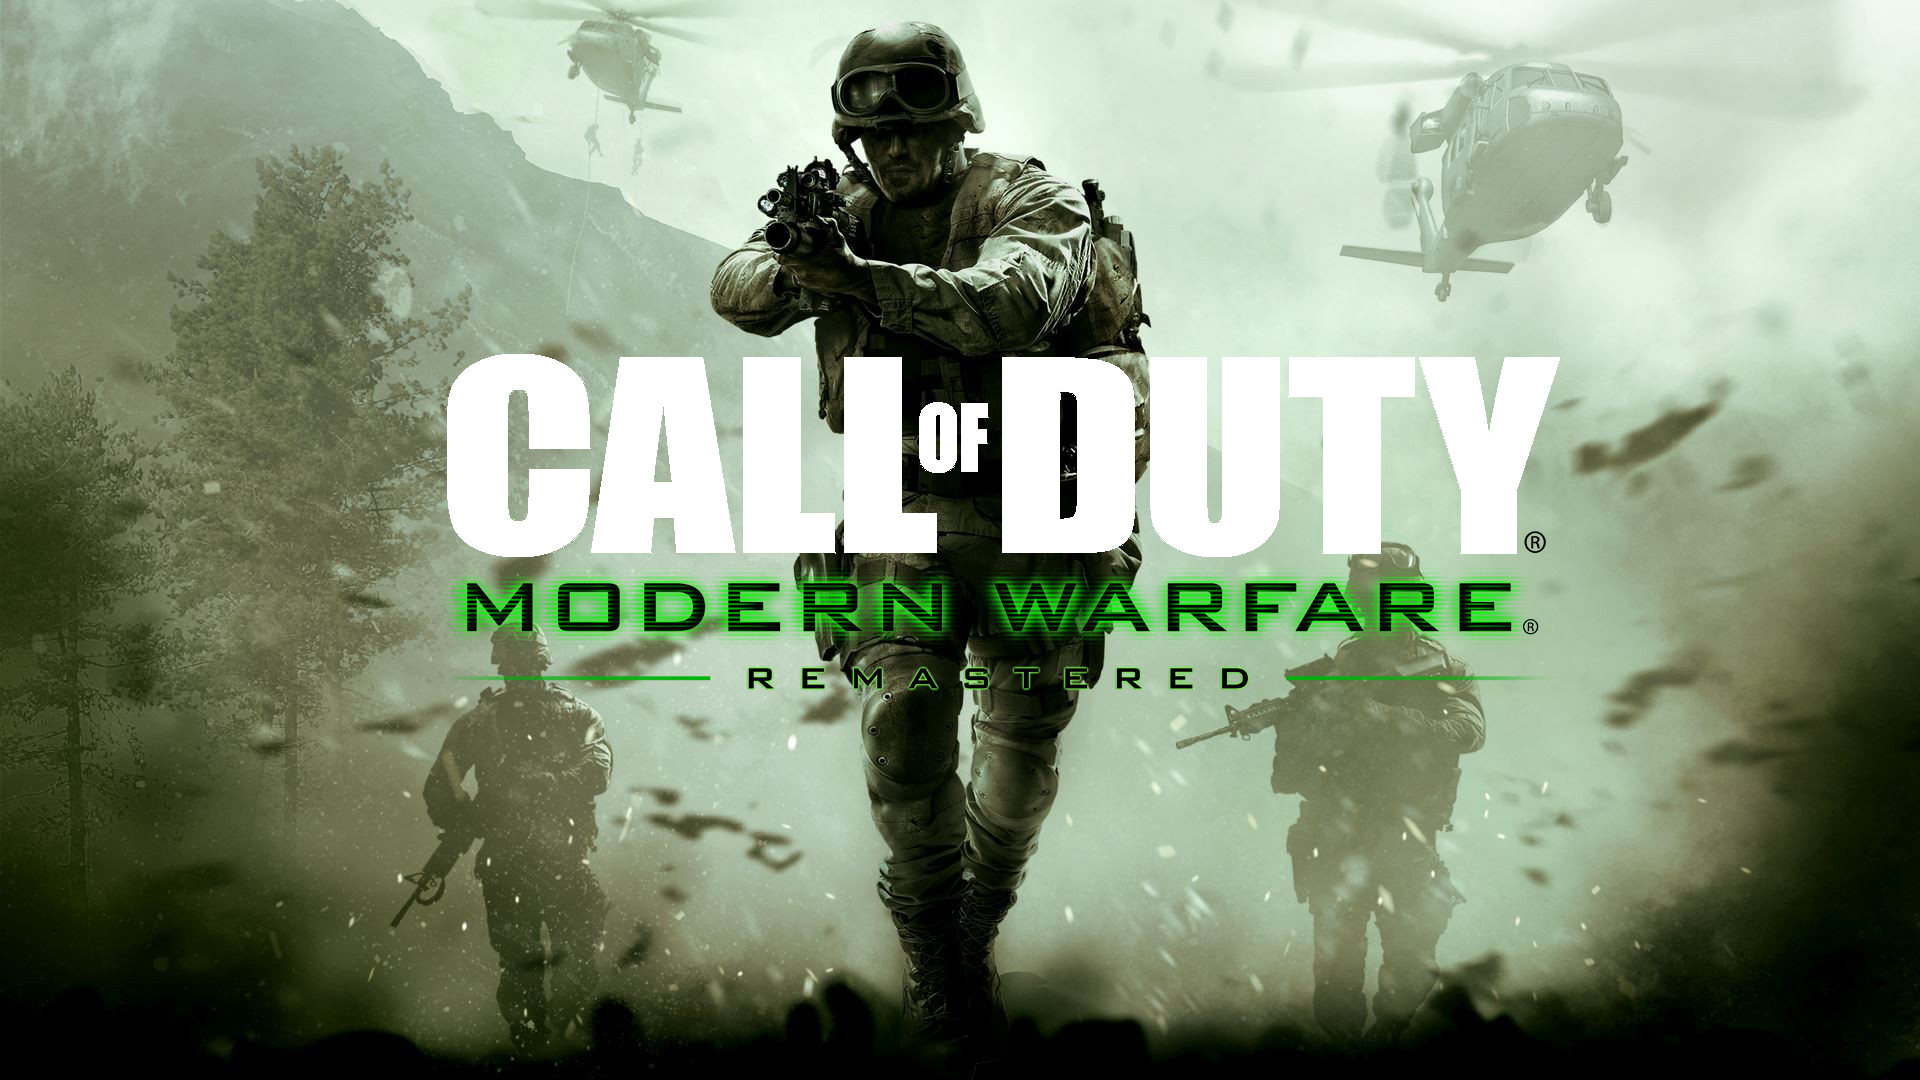 Steam must be running to play this game call of duty modern warfare фото 63